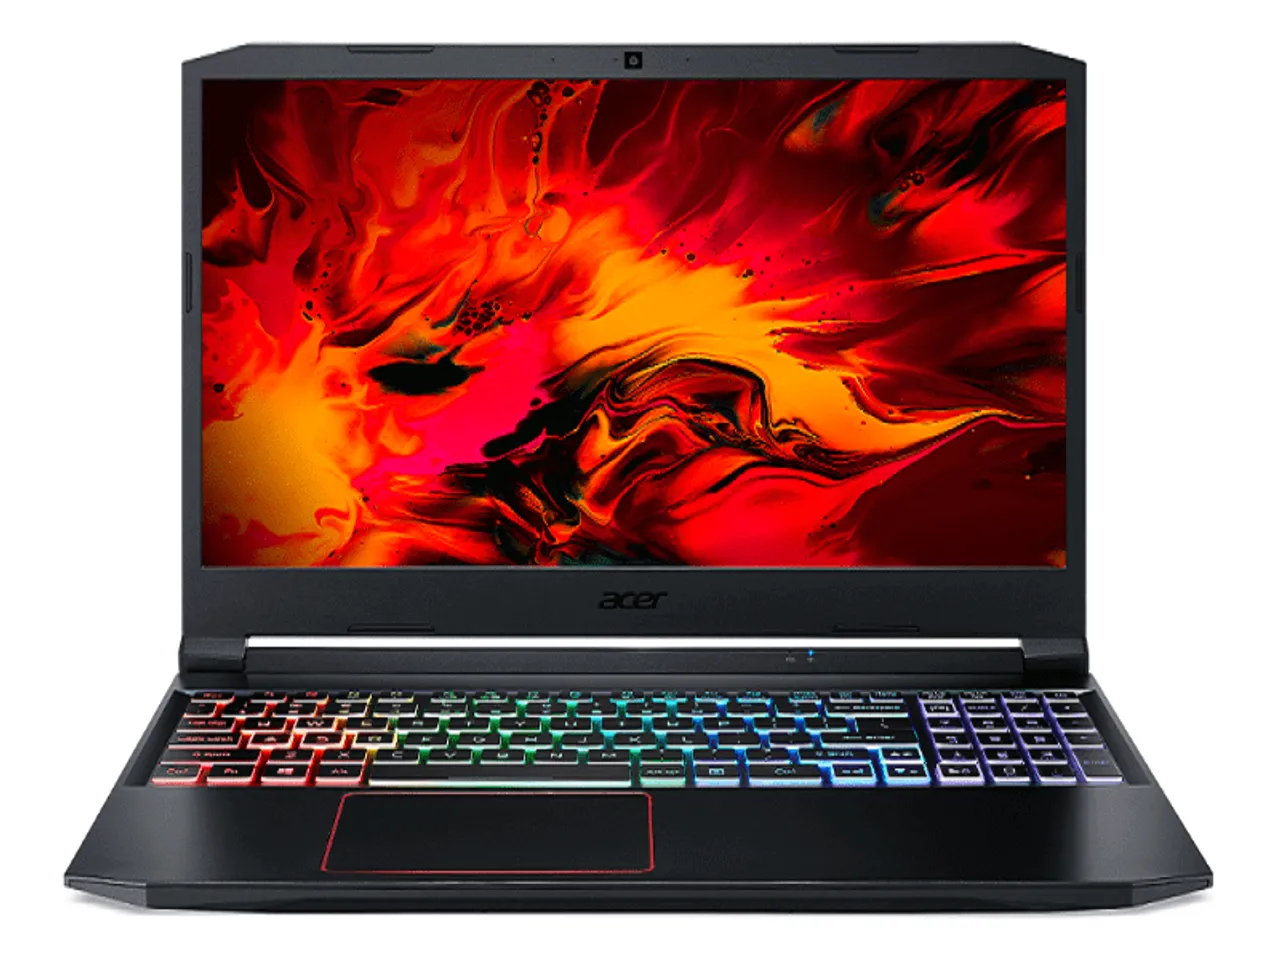 Acer Nitro 5 Specifications and Pricing: Can It Run Crysis Though?